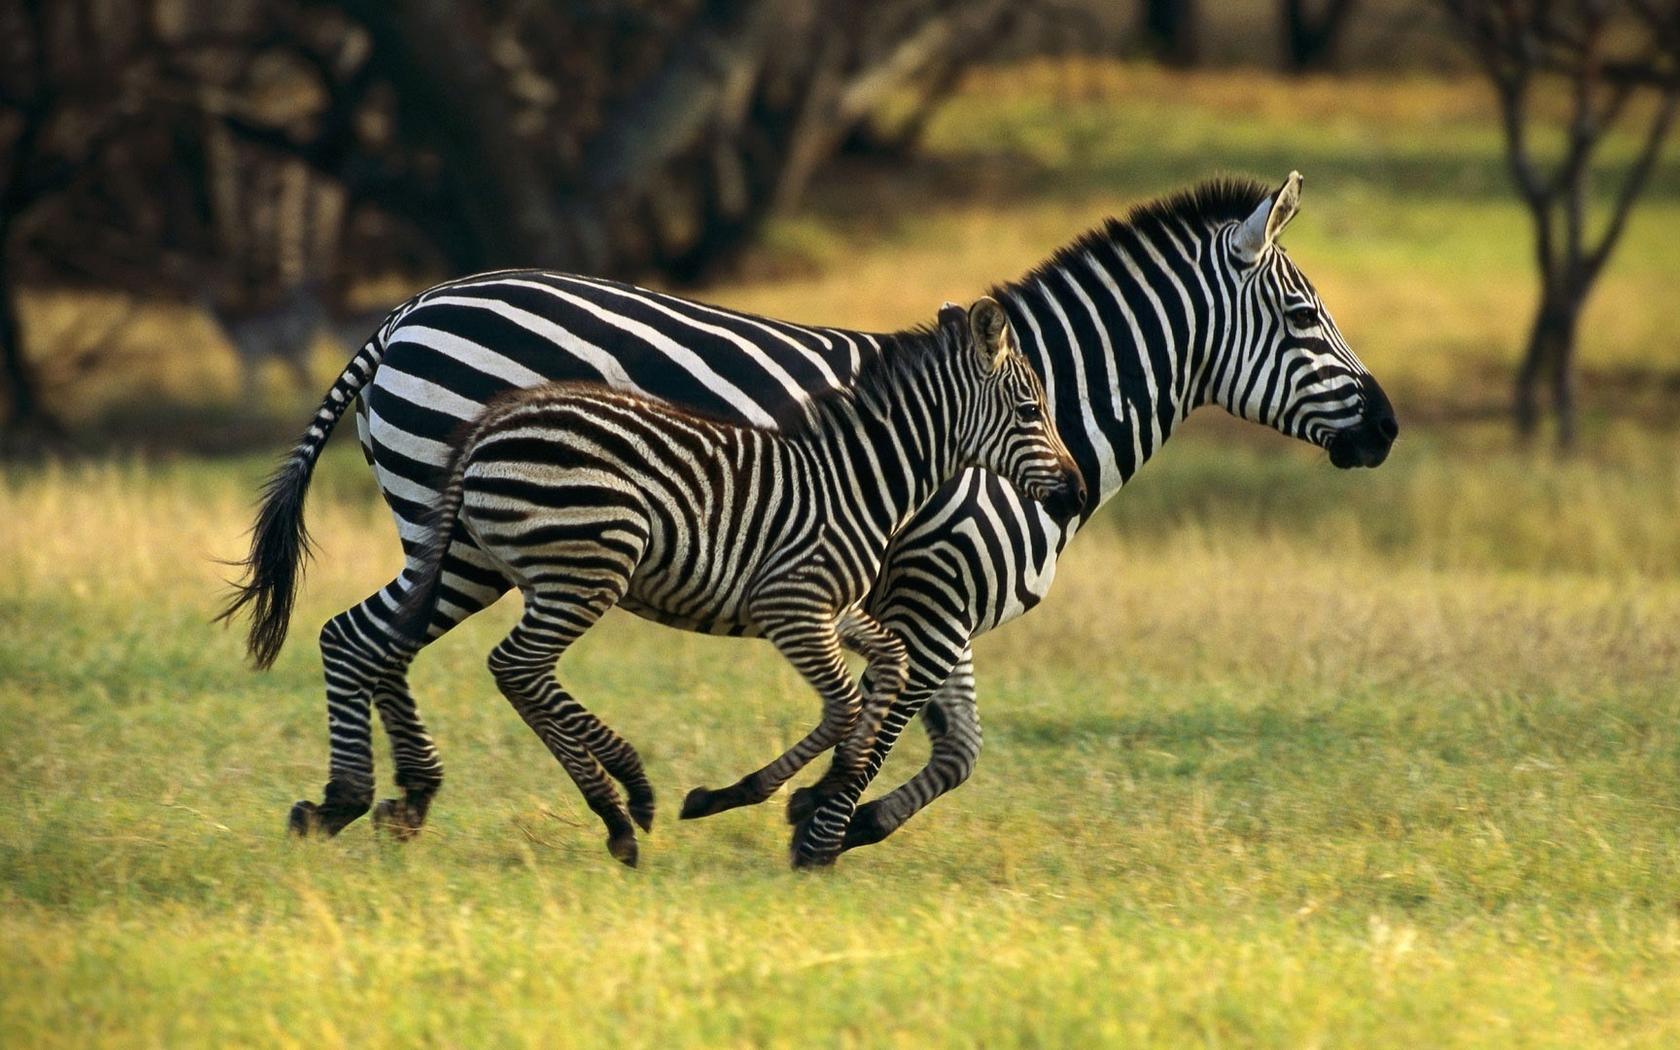 Mother and child running in the jungle - Zebra animals